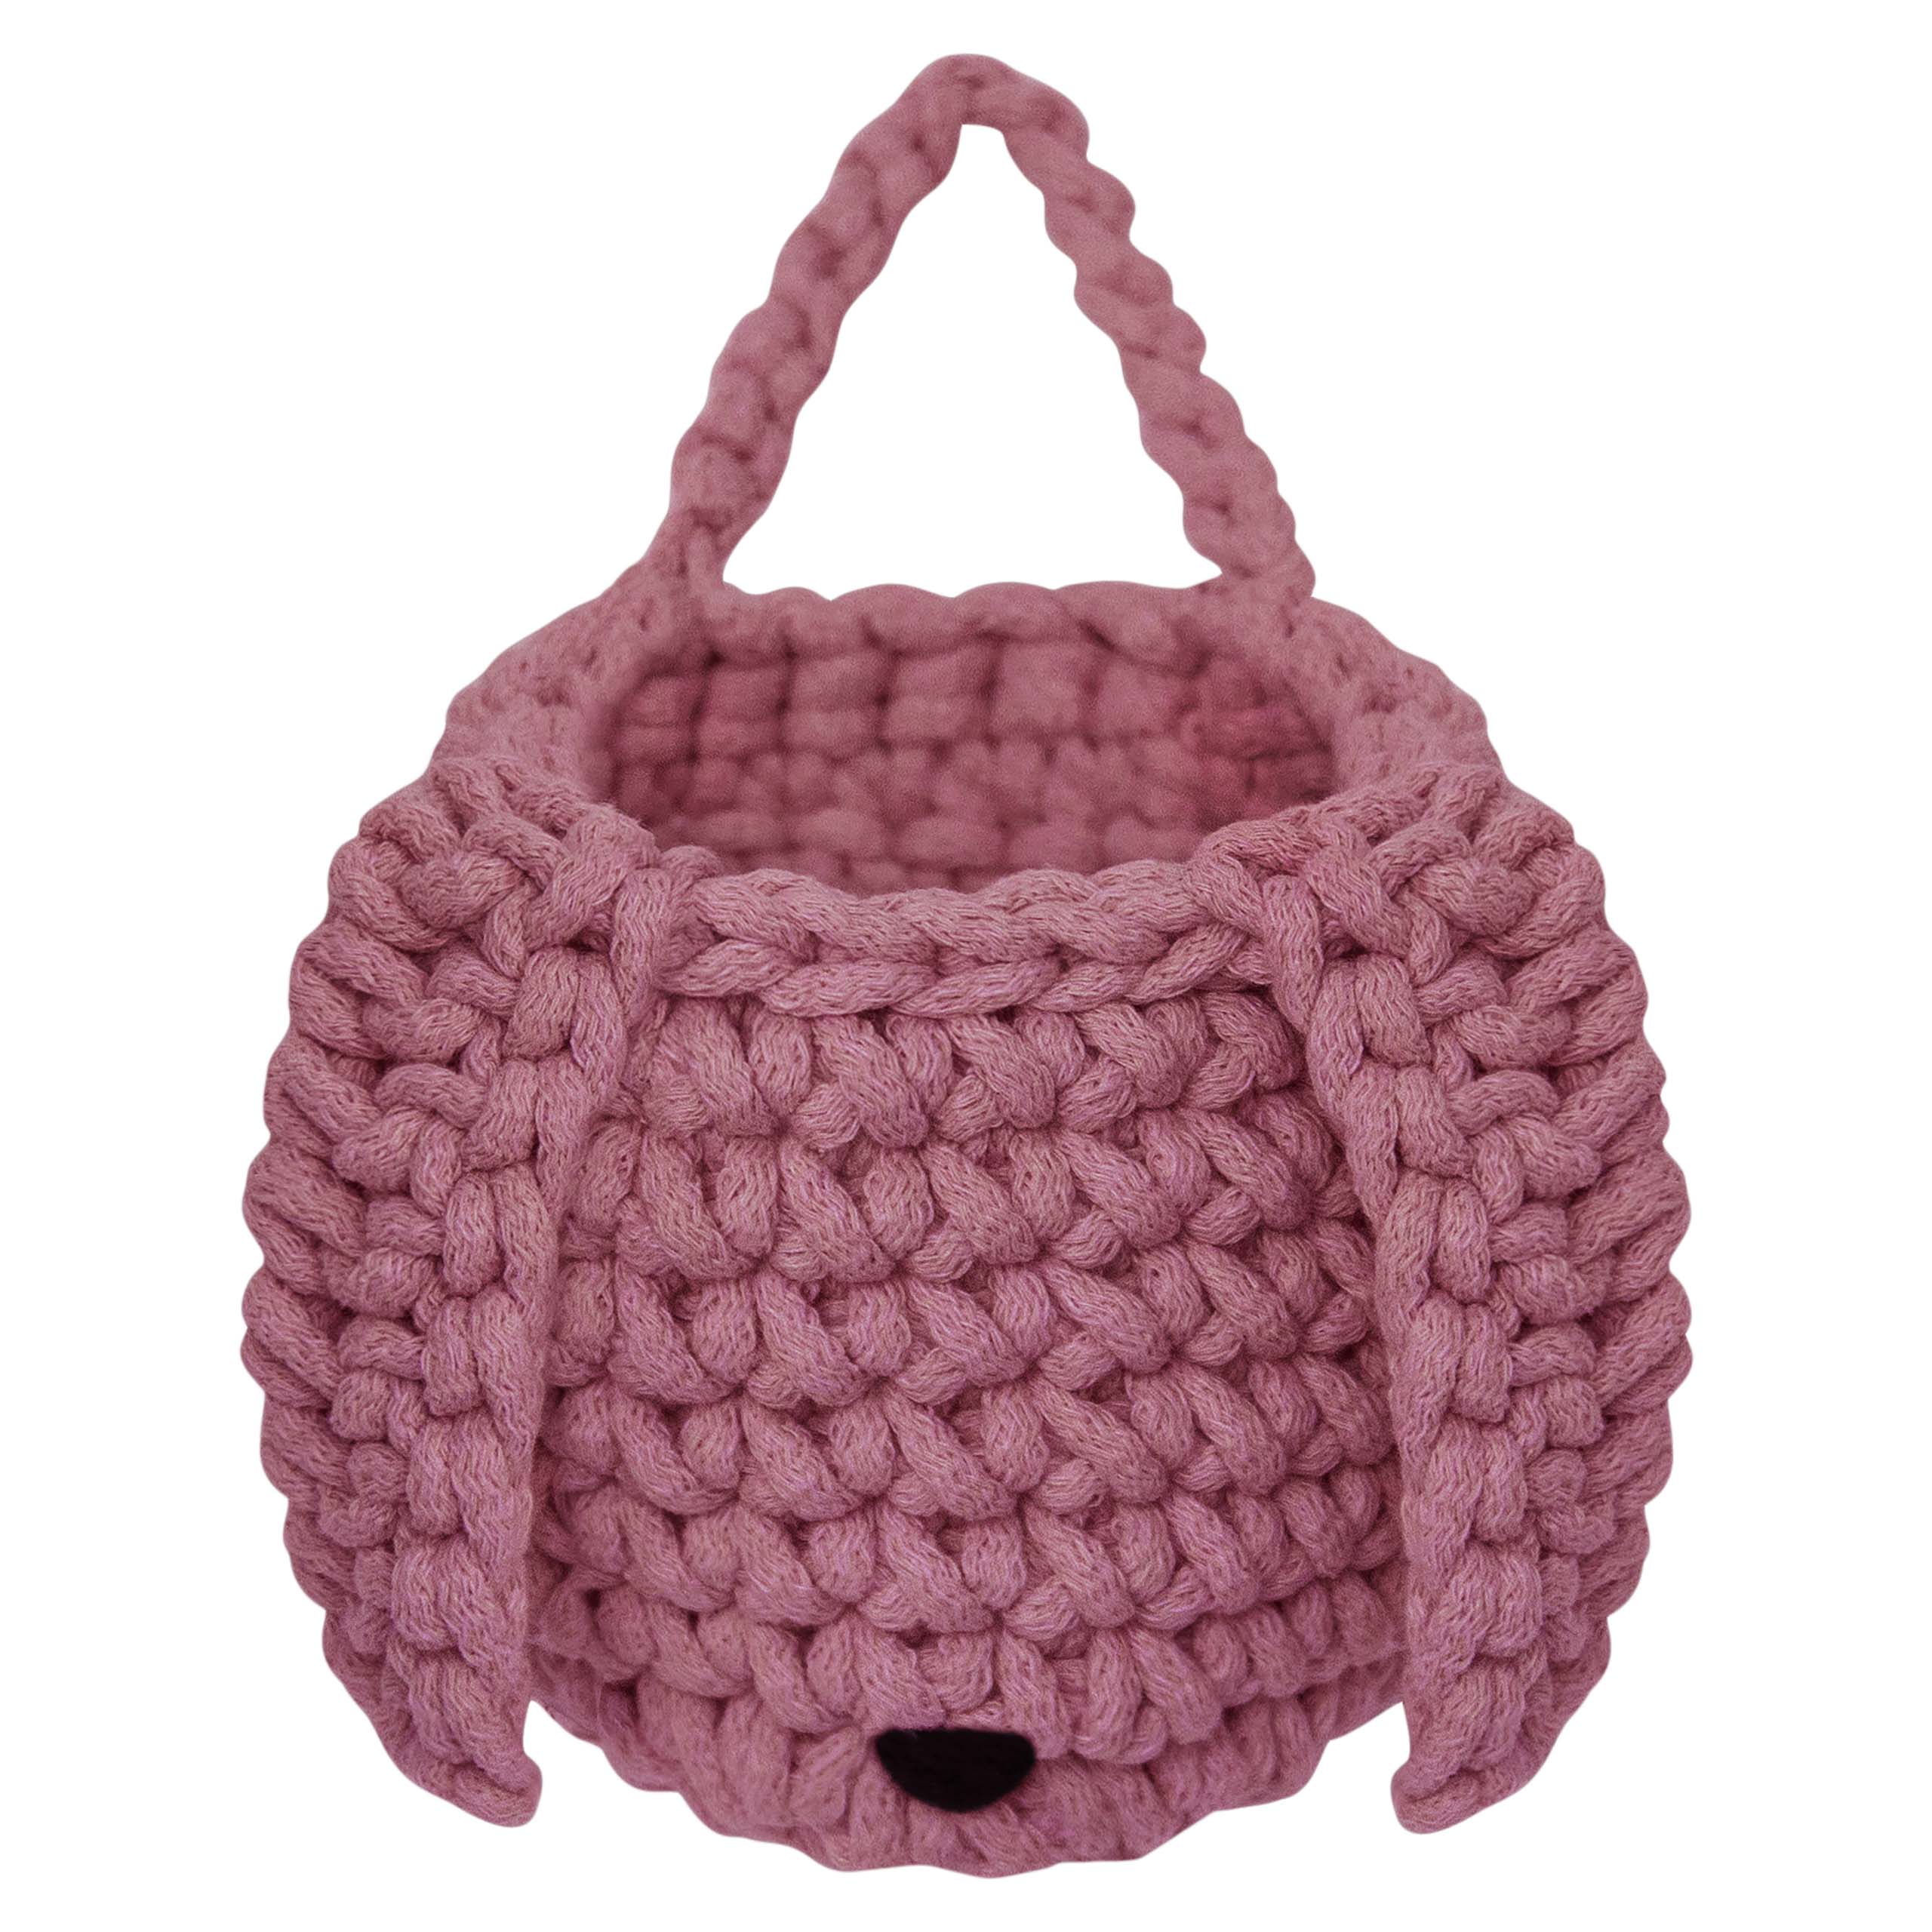 Zuri House Crochet Bunny Basket | OLD ROSE - without handle